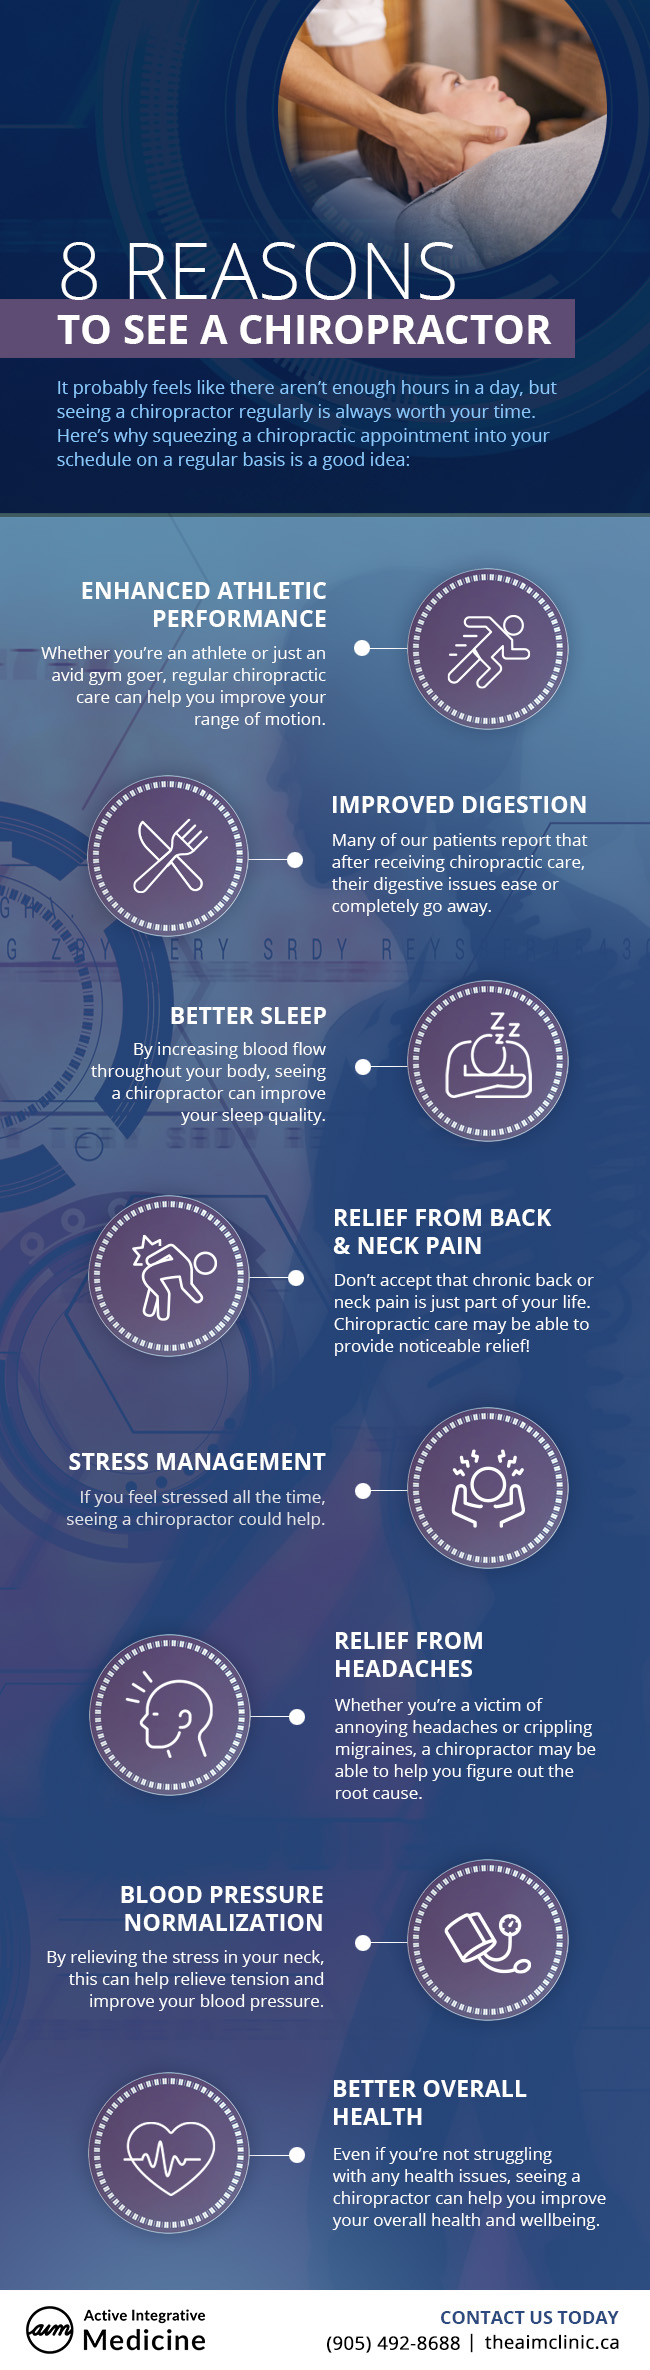 Chiropractic Care Yields Many Benefits